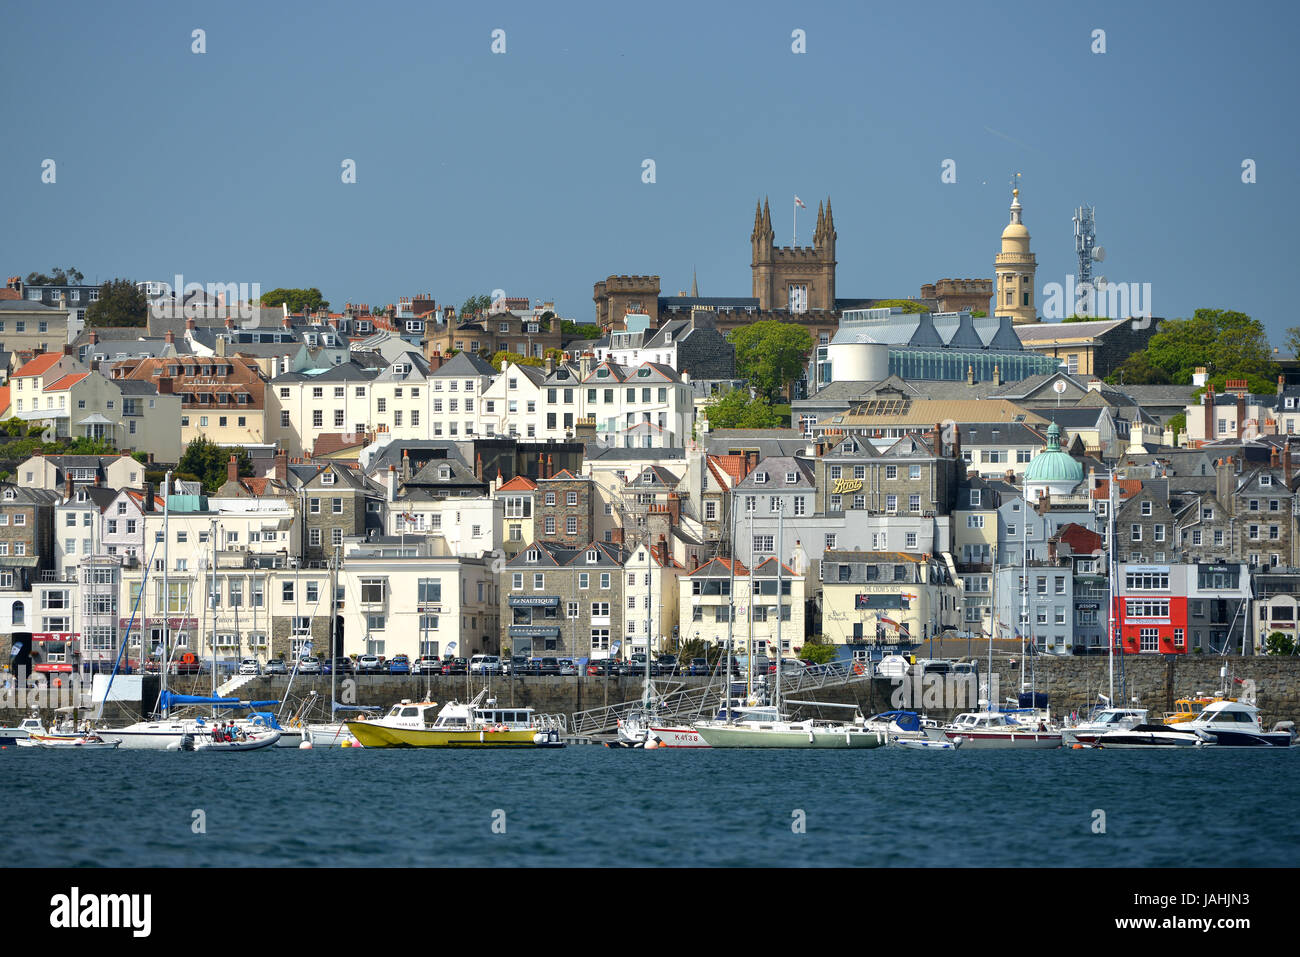 St Peter Port, Guernsey, Channel Isles, from the sea. Stock Photo